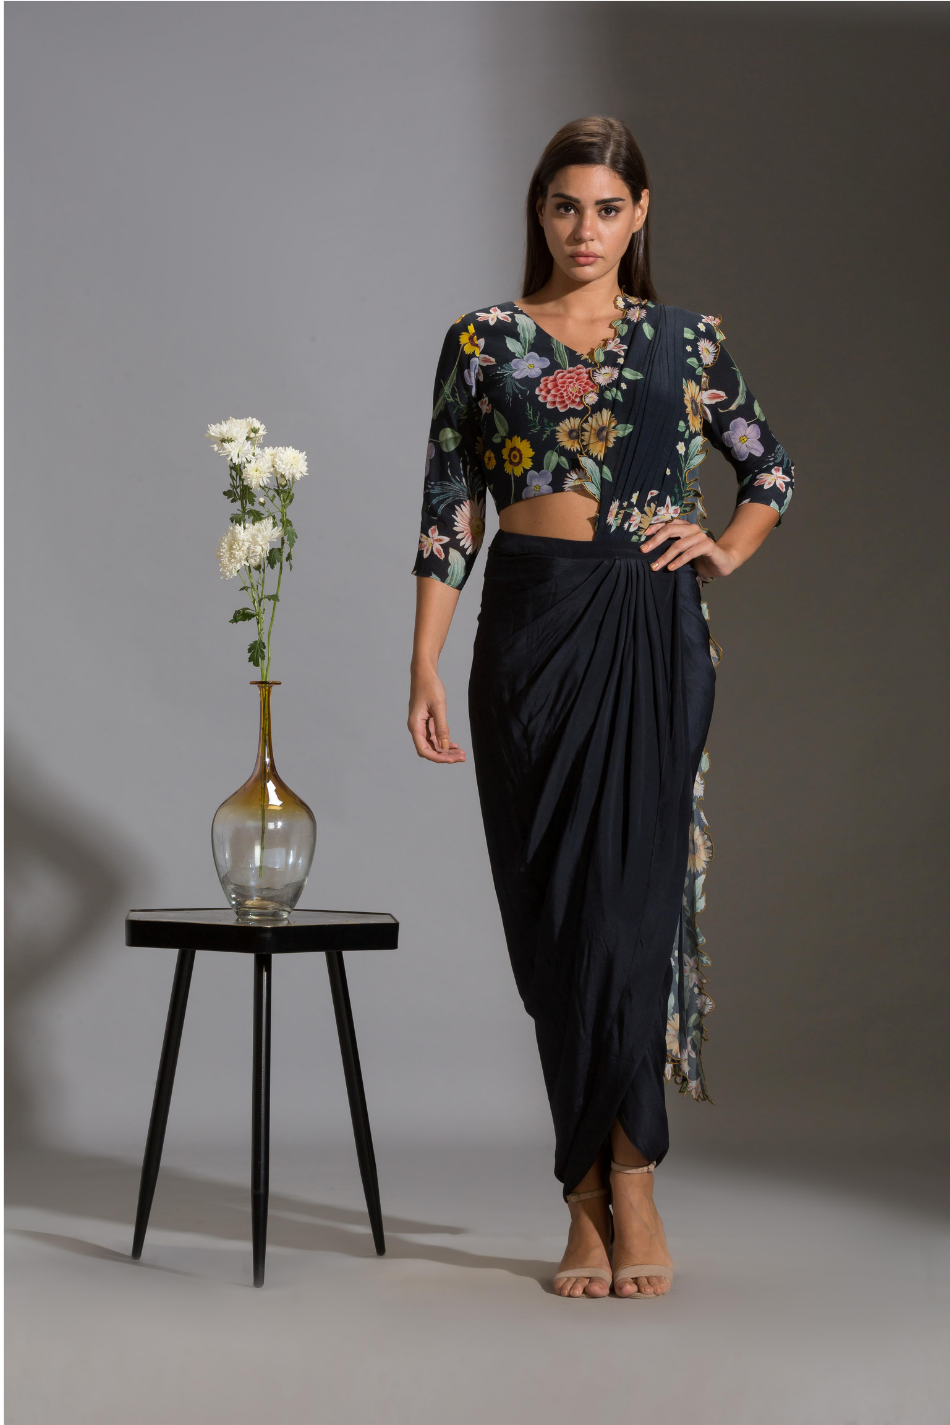 Image of FLORAL CROP TOP WITH PLAIN BLACK DREPE SKIRT. From savoirfashions.com